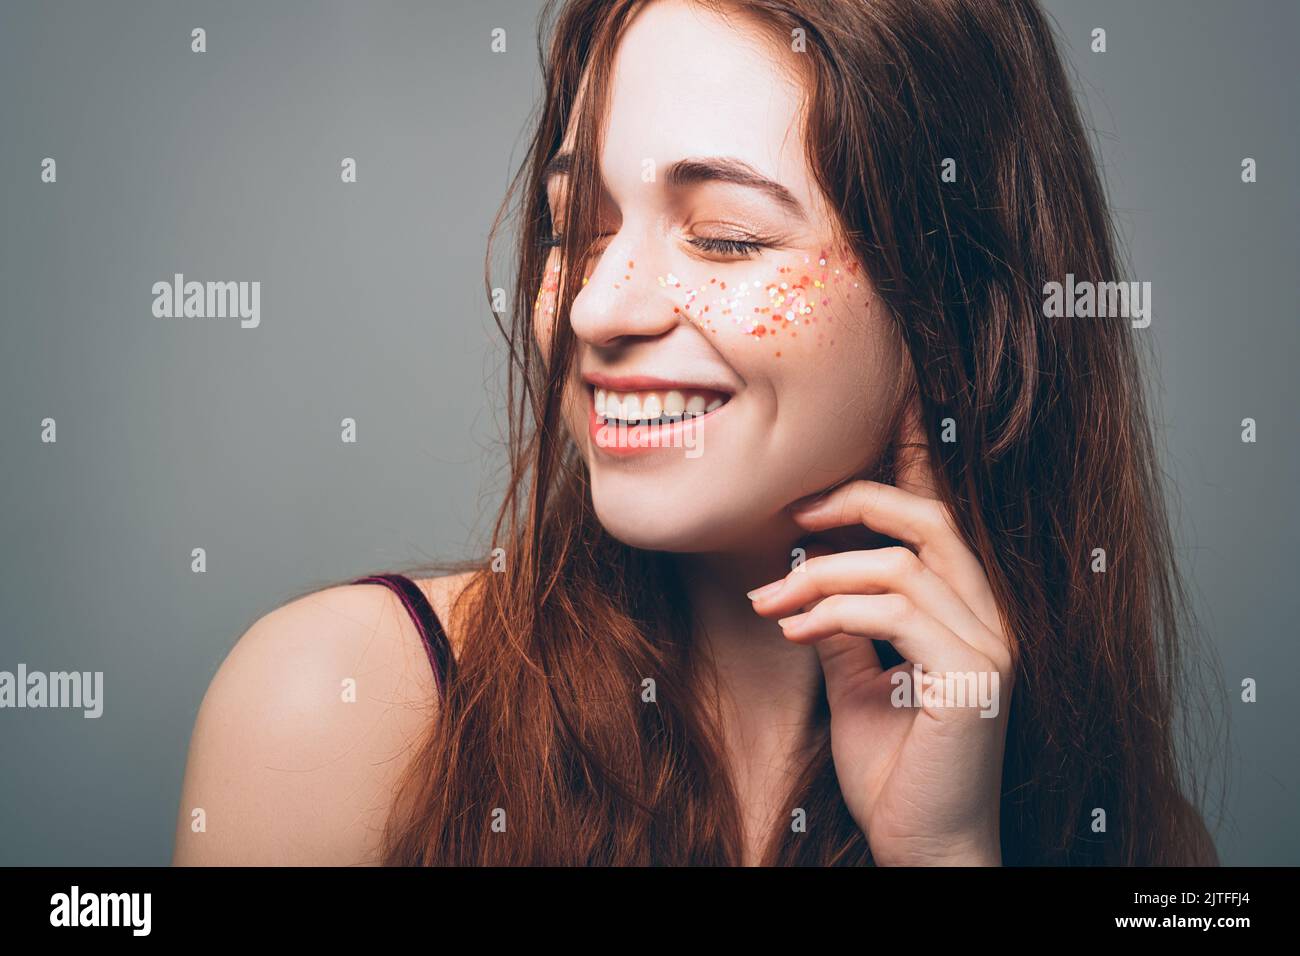 smiling young woman beauty freedom happiness Stock Photo